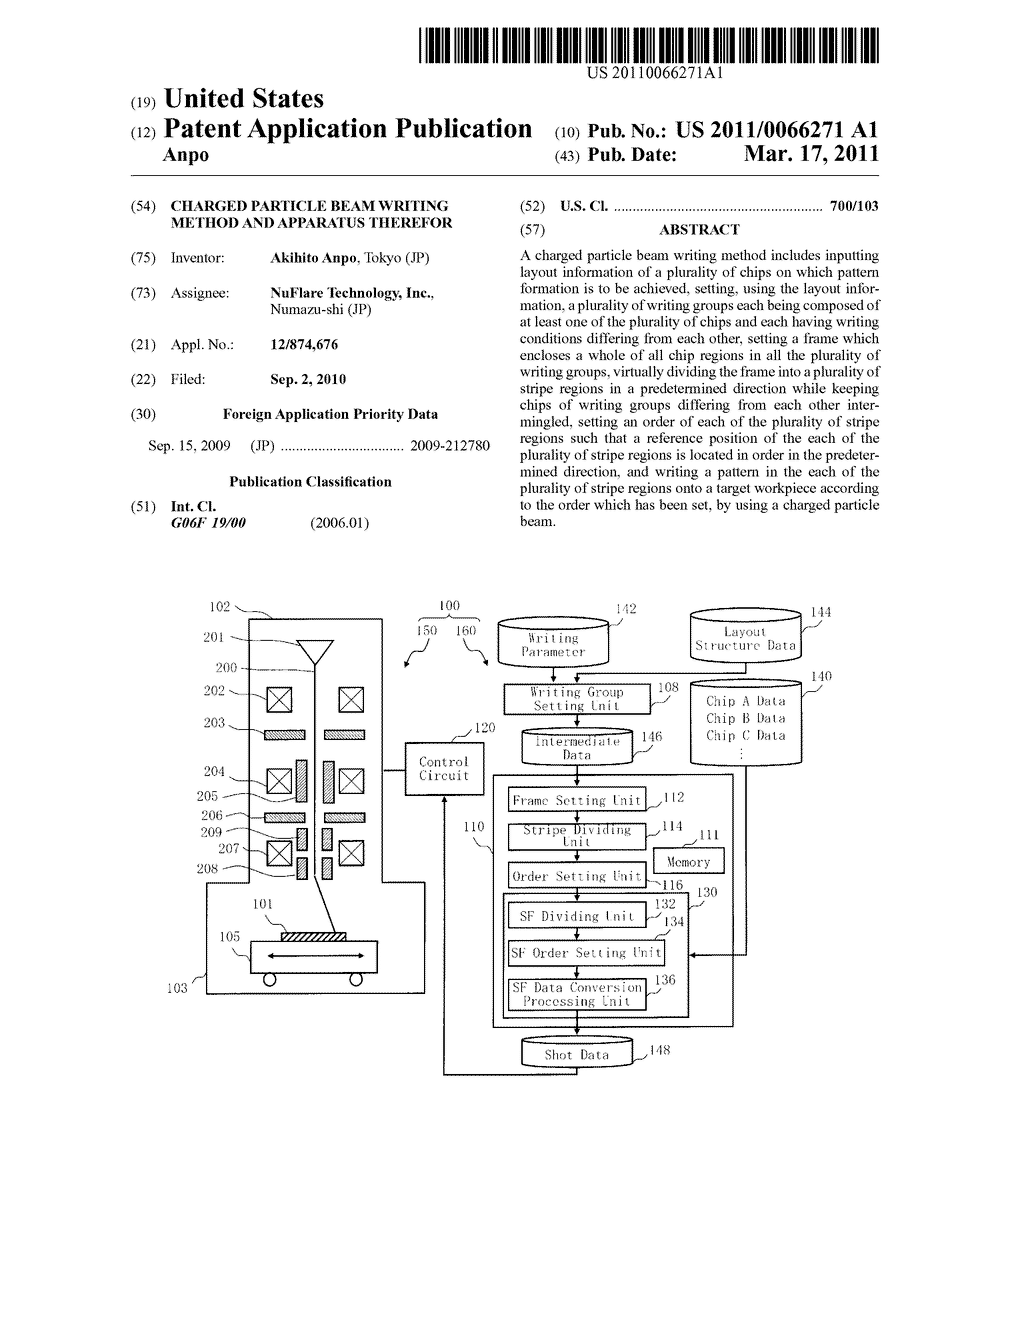 CHARGED PARTICLE BEAM WRITING METHOD AND APPARATUS THEREFOR - diagram, schematic, and image 01